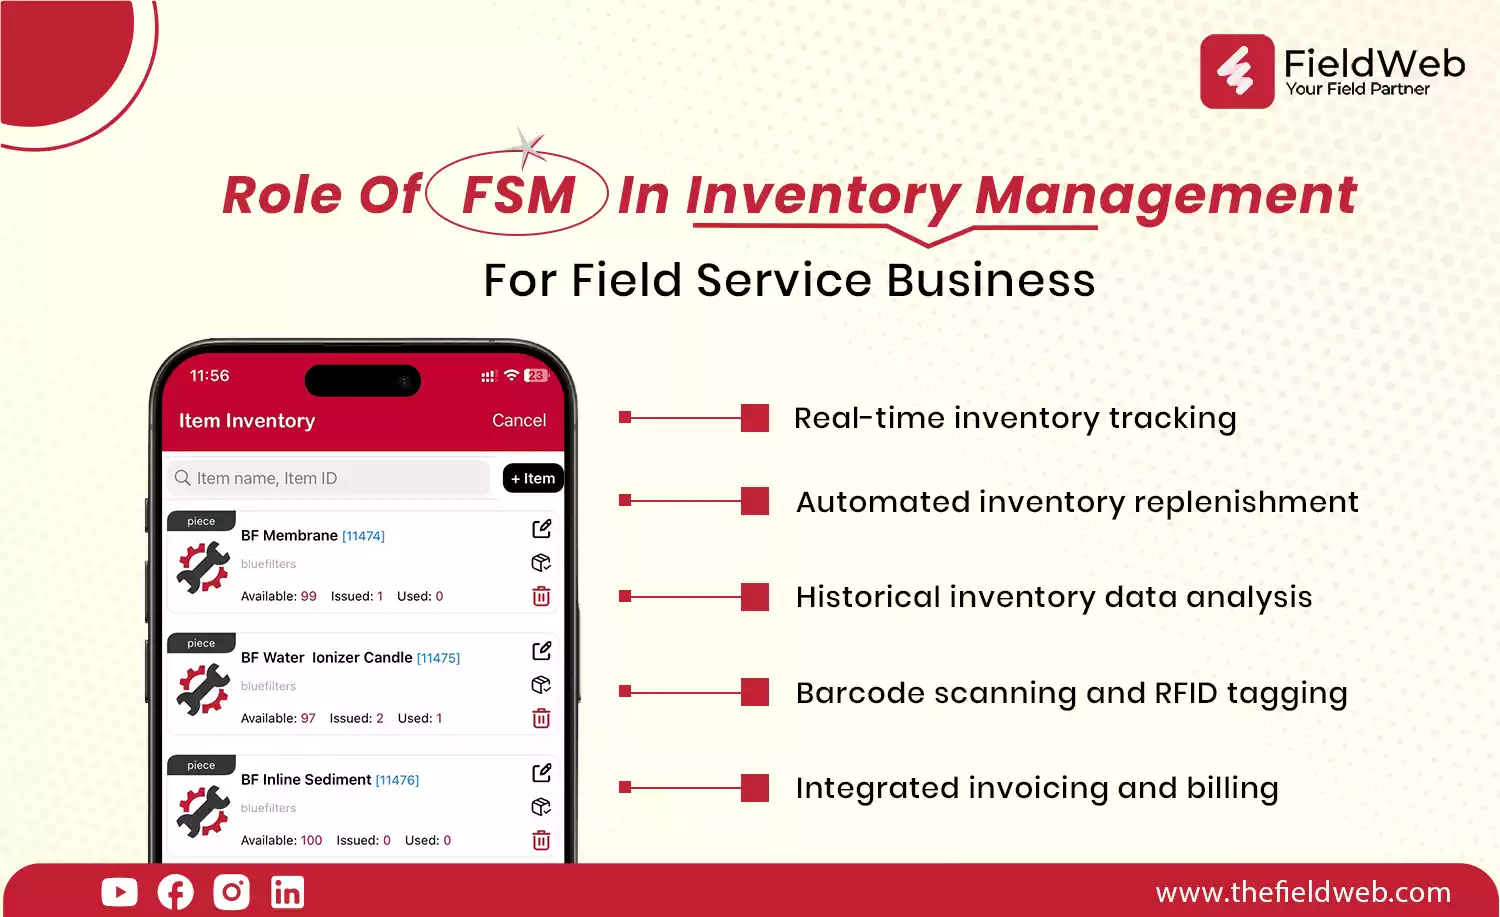 image is displaying 5 role of FSM in inventory management for field service businesses